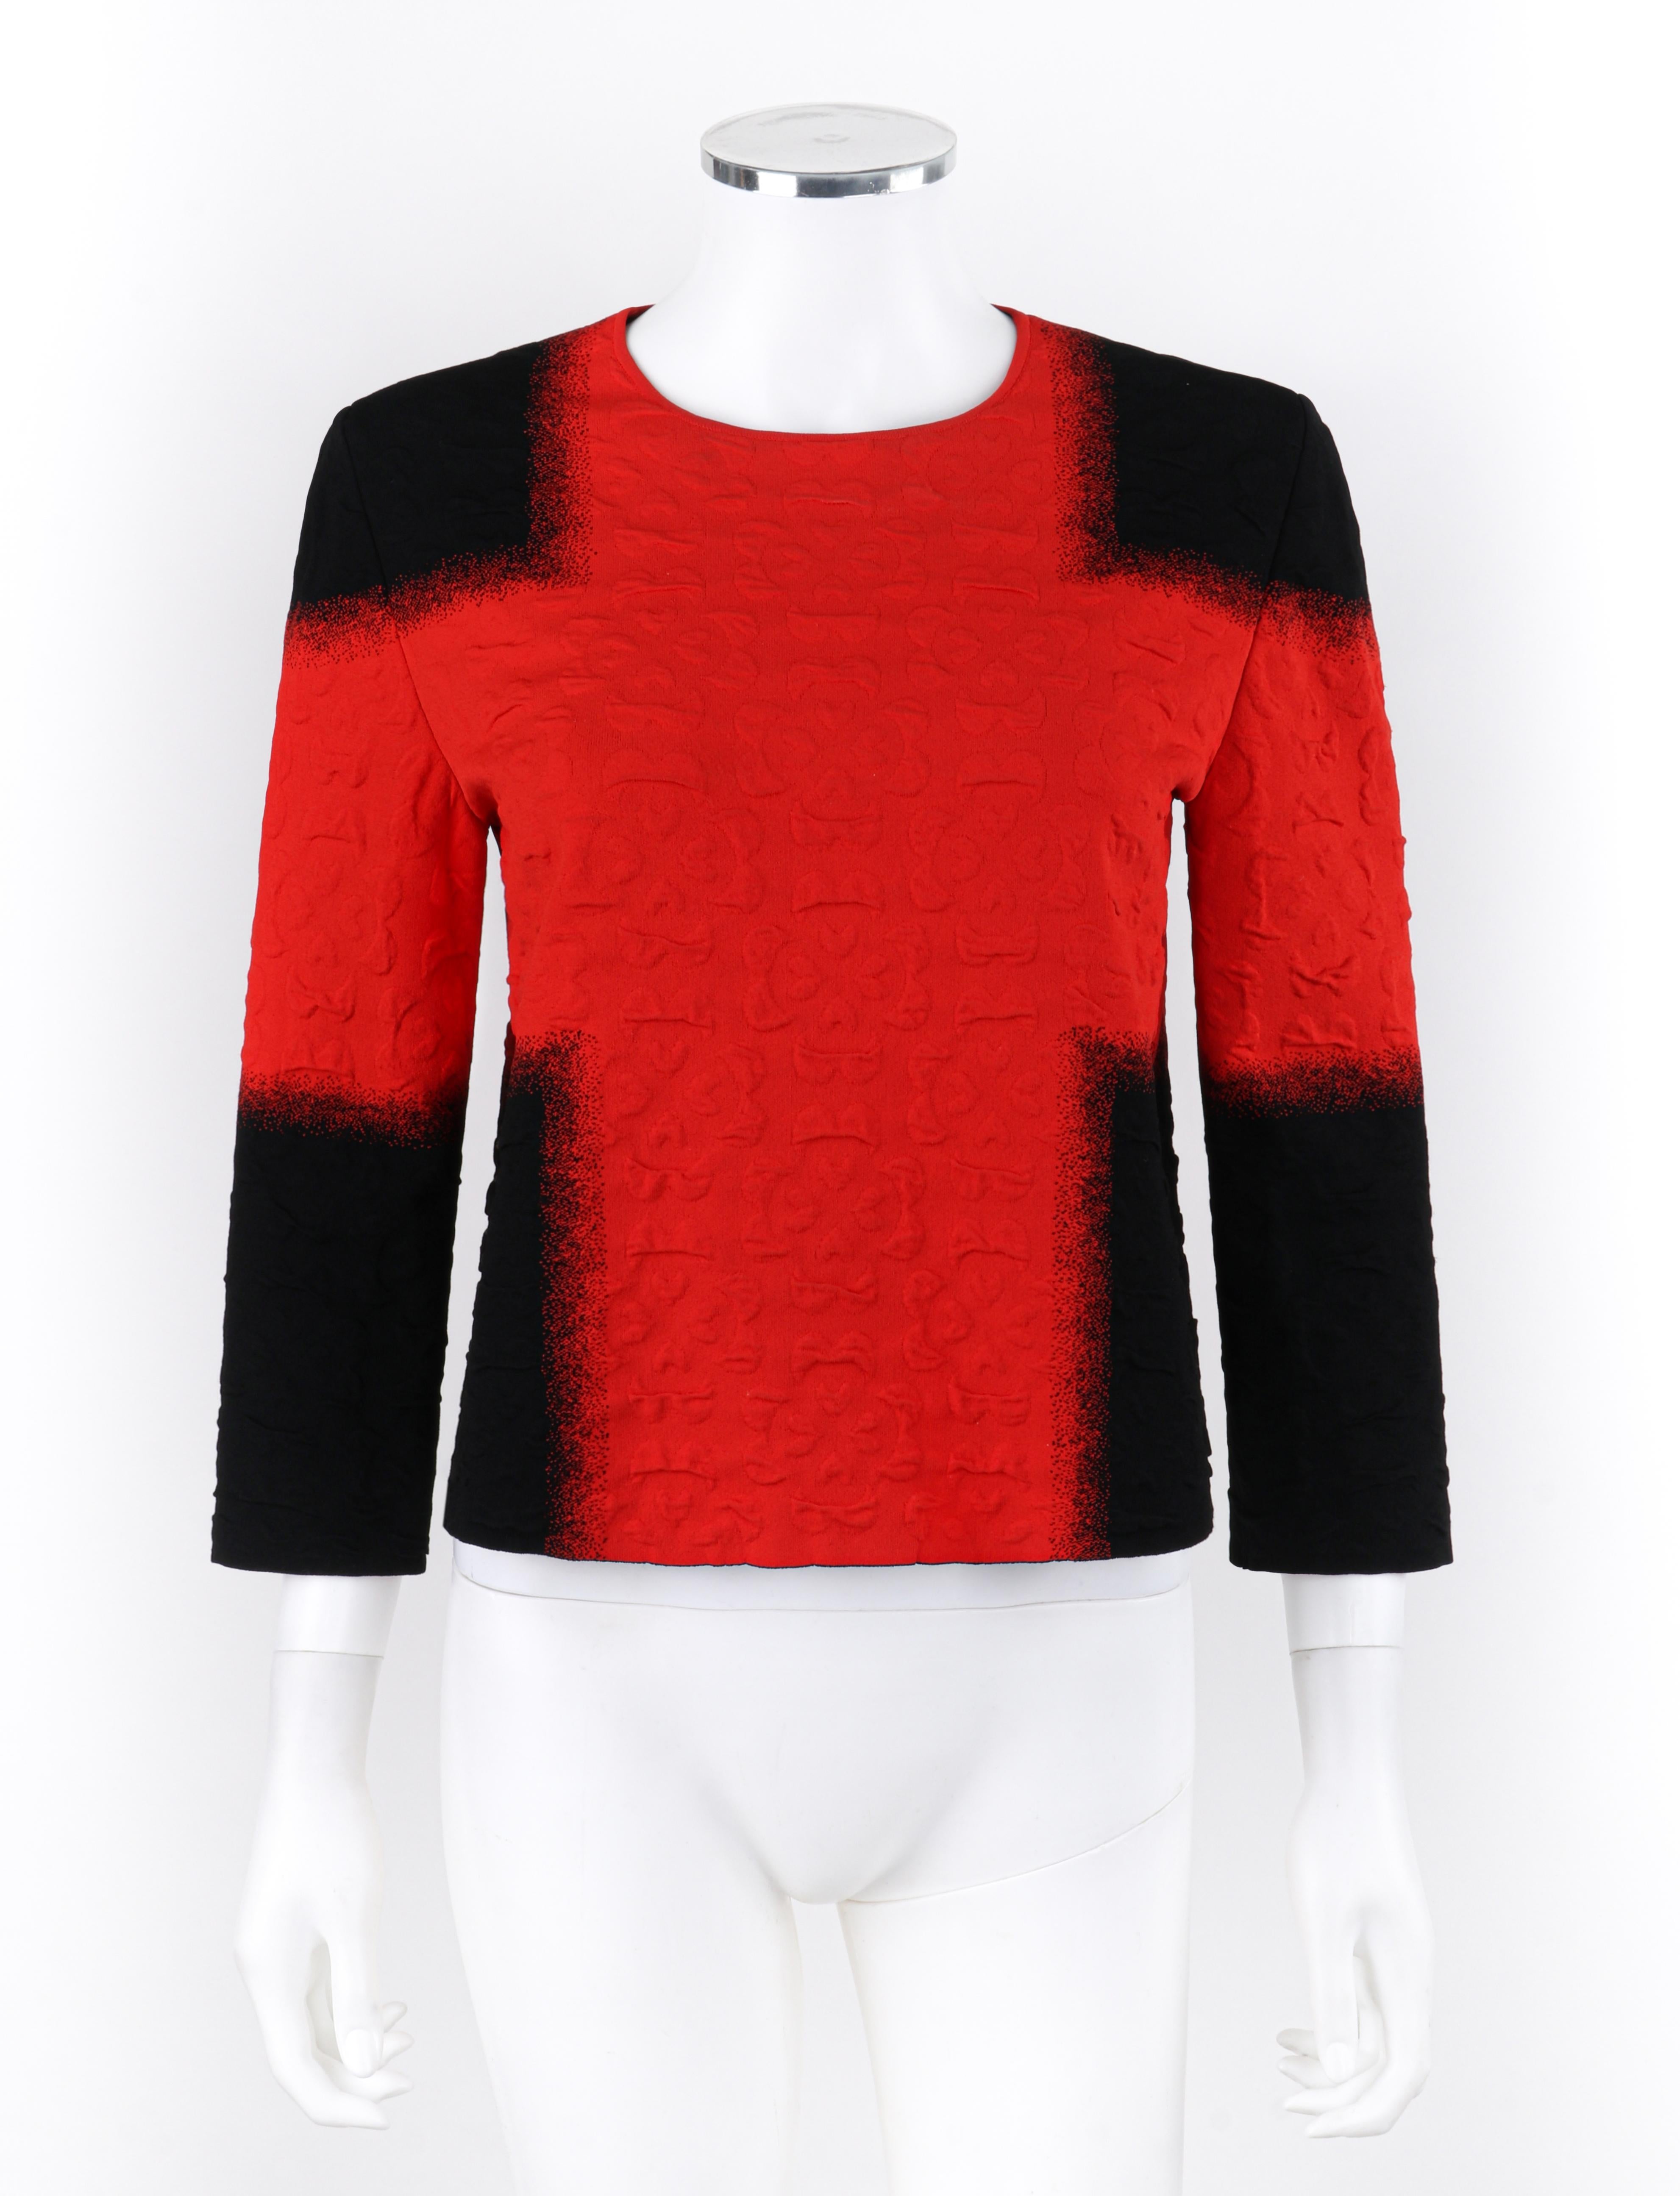 ALEXANDER McQUEEN Resort 2015 Black Red Embossed Stretch Knit Colorblock Top  In Good Condition For Sale In Thiensville, WI